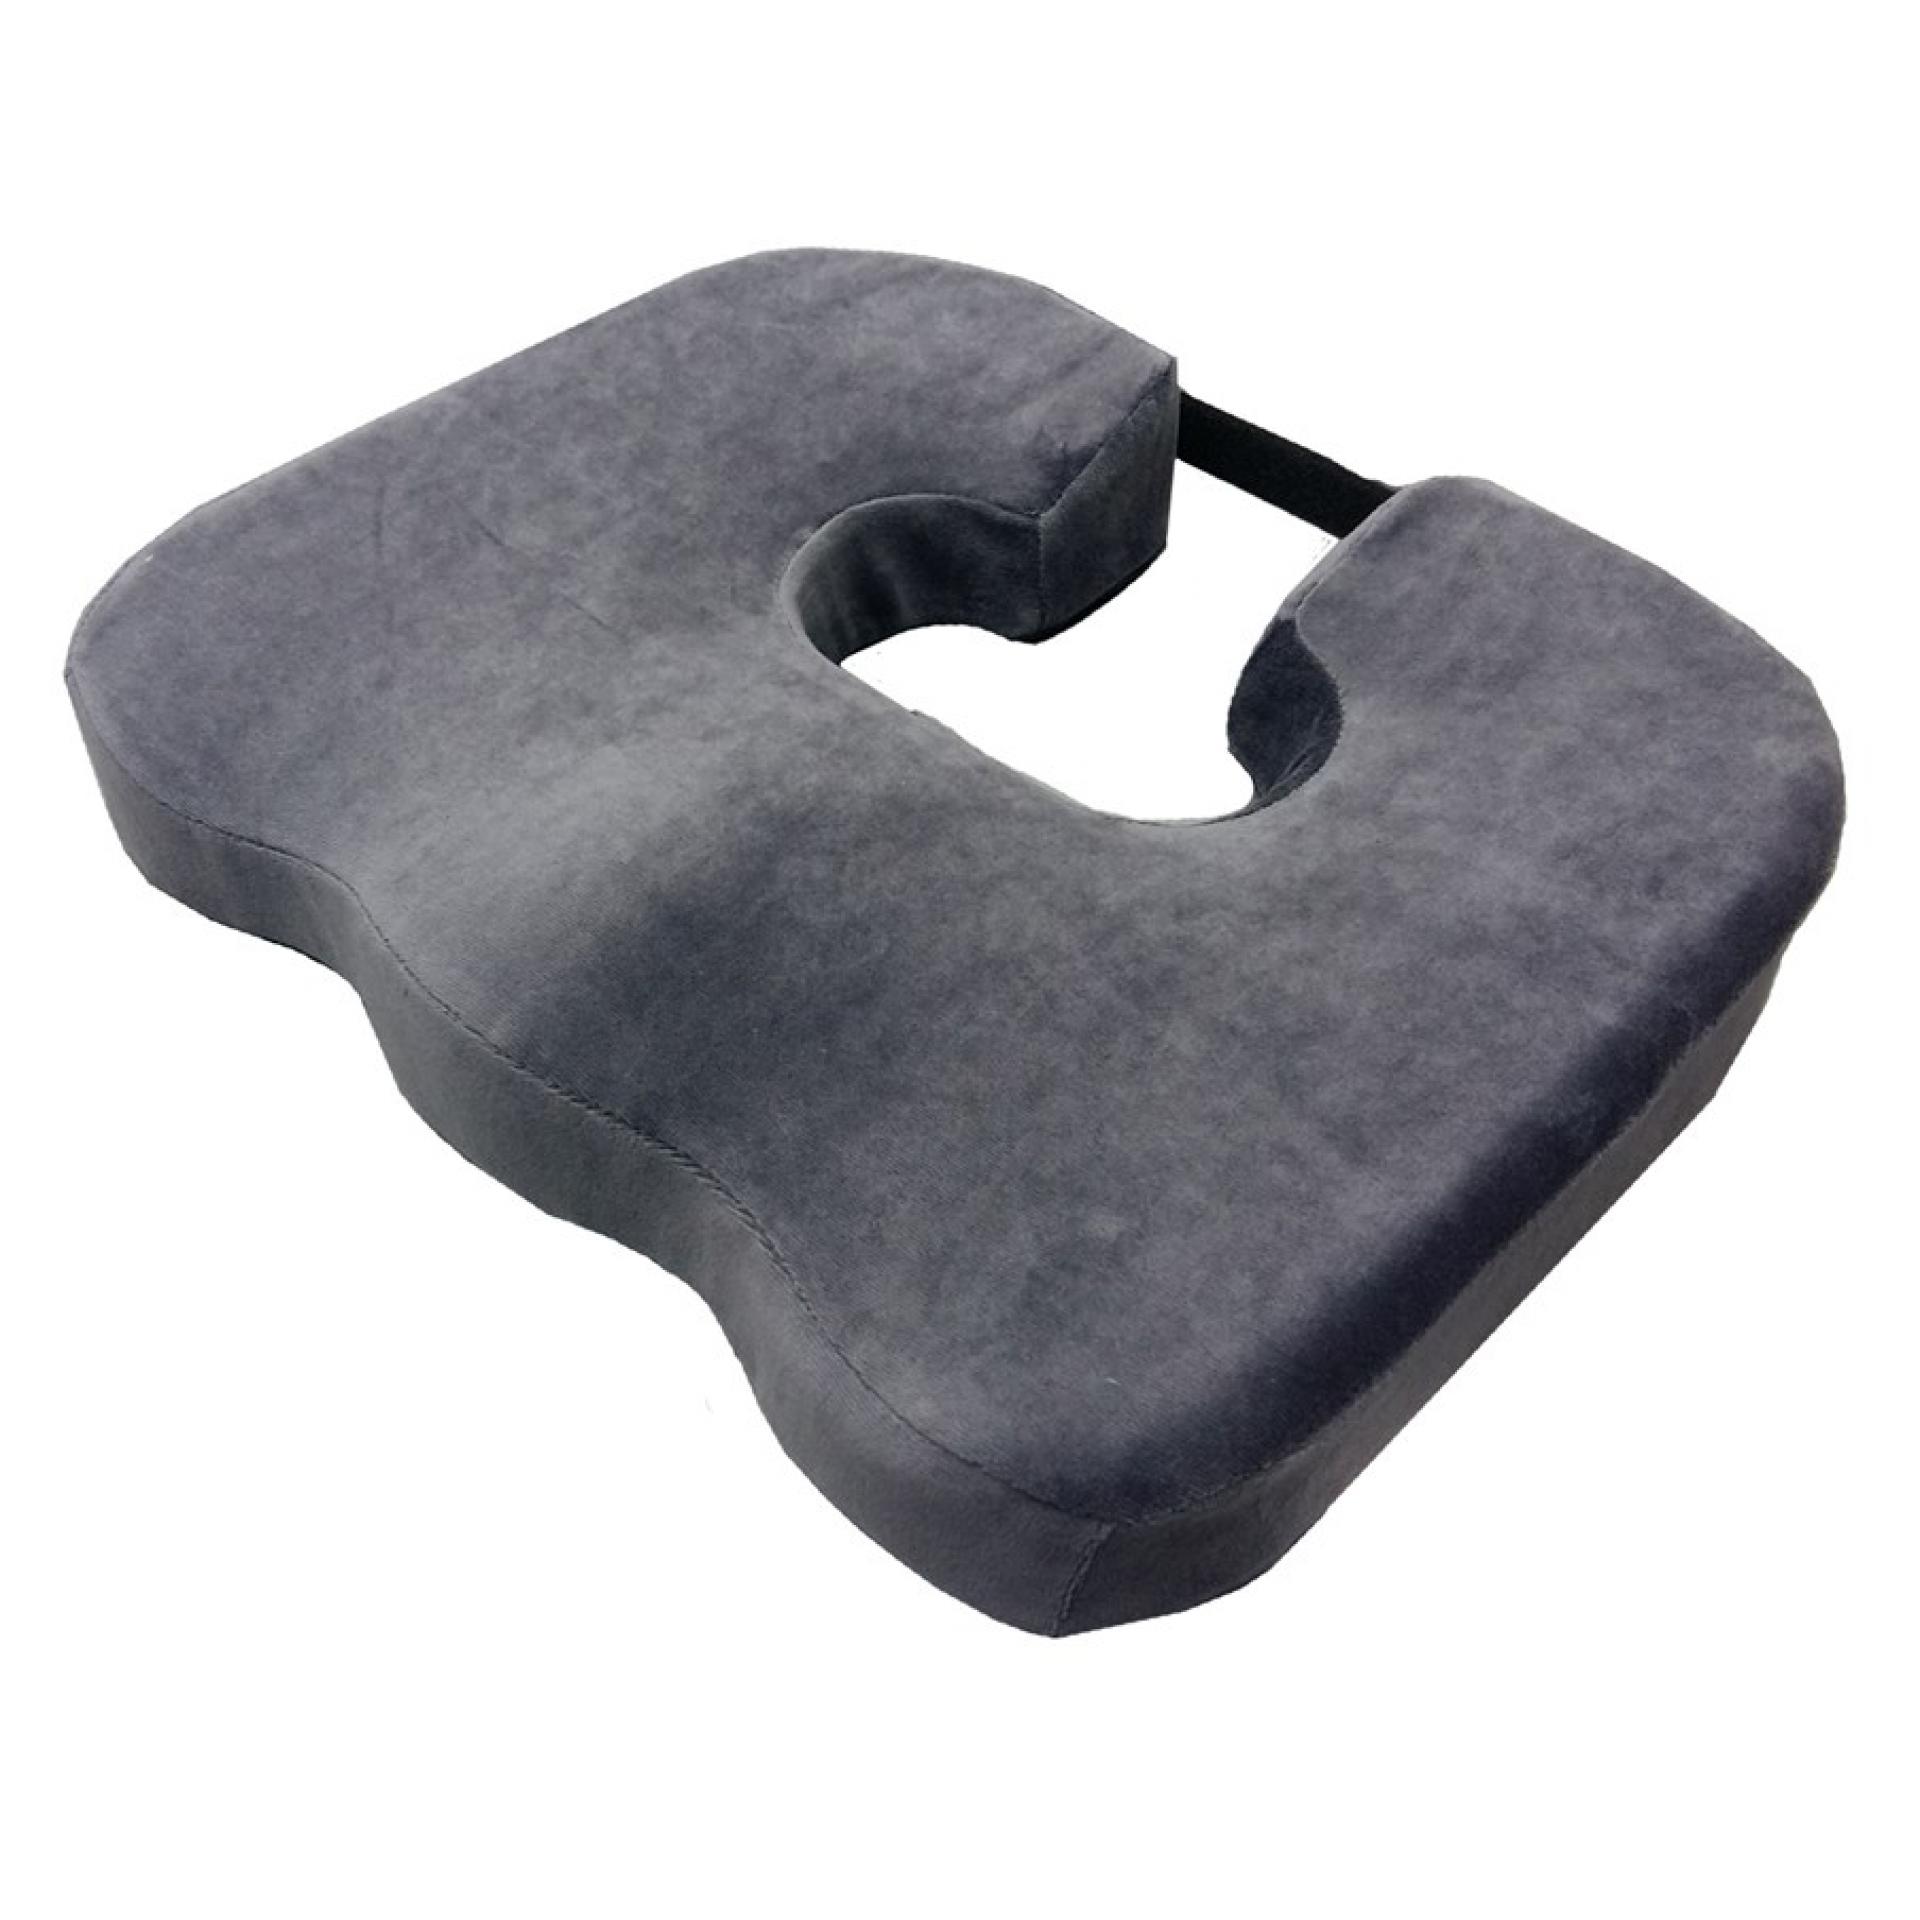 Coccyx Orthopaedic Cushion - Providing The Best In Mobility And ...